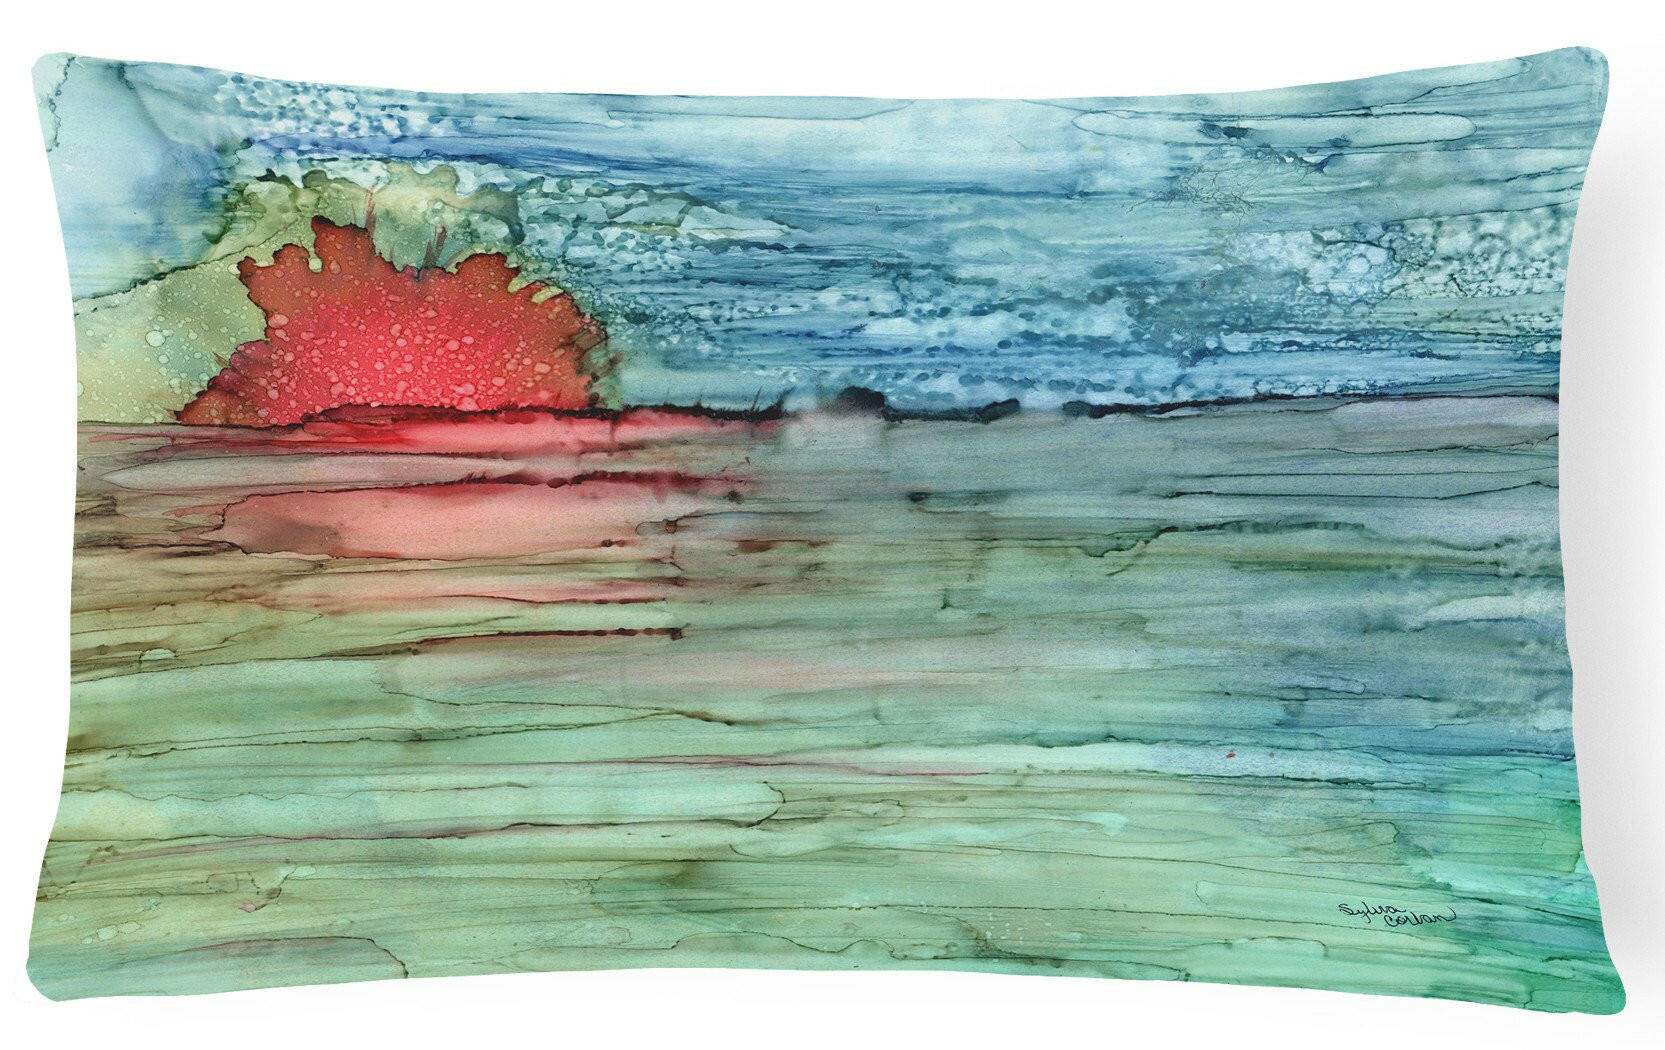 Abstract Sunset on the Water Fabric Decorative Pillow 8984PW1216 by Caroline's Treasures